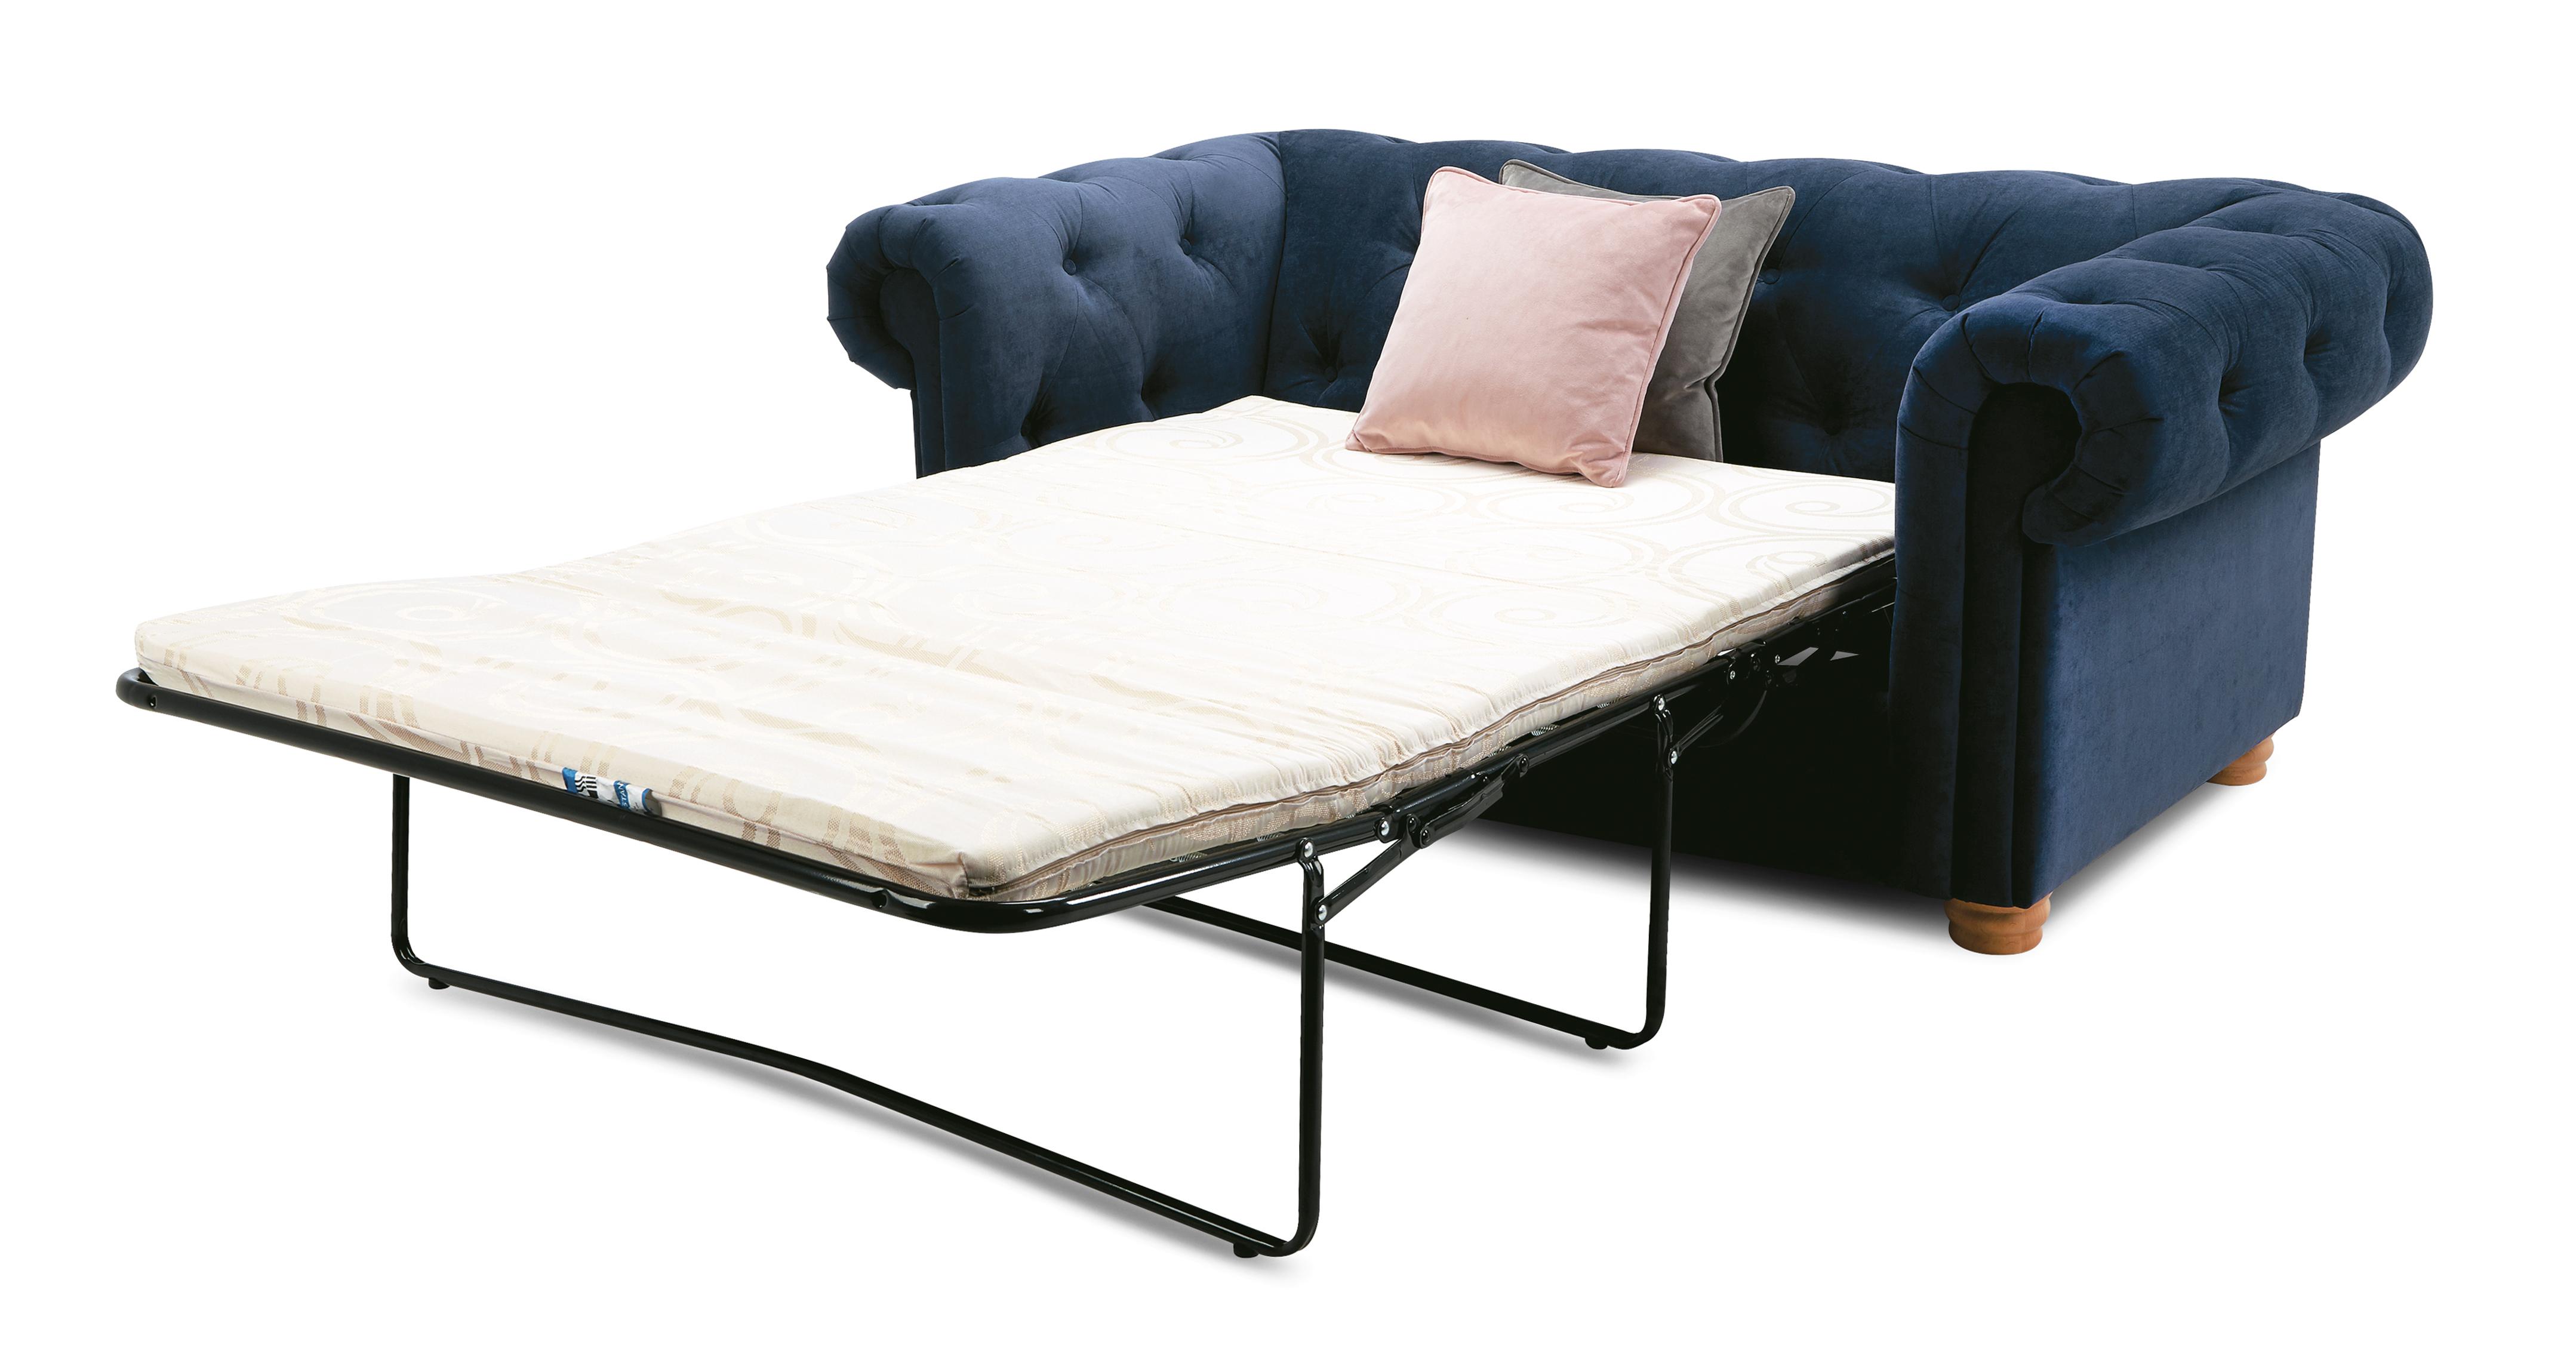 Belair Clearance 2 Seater Sofa Bed Plaza Dark Blue Clearance Dfs